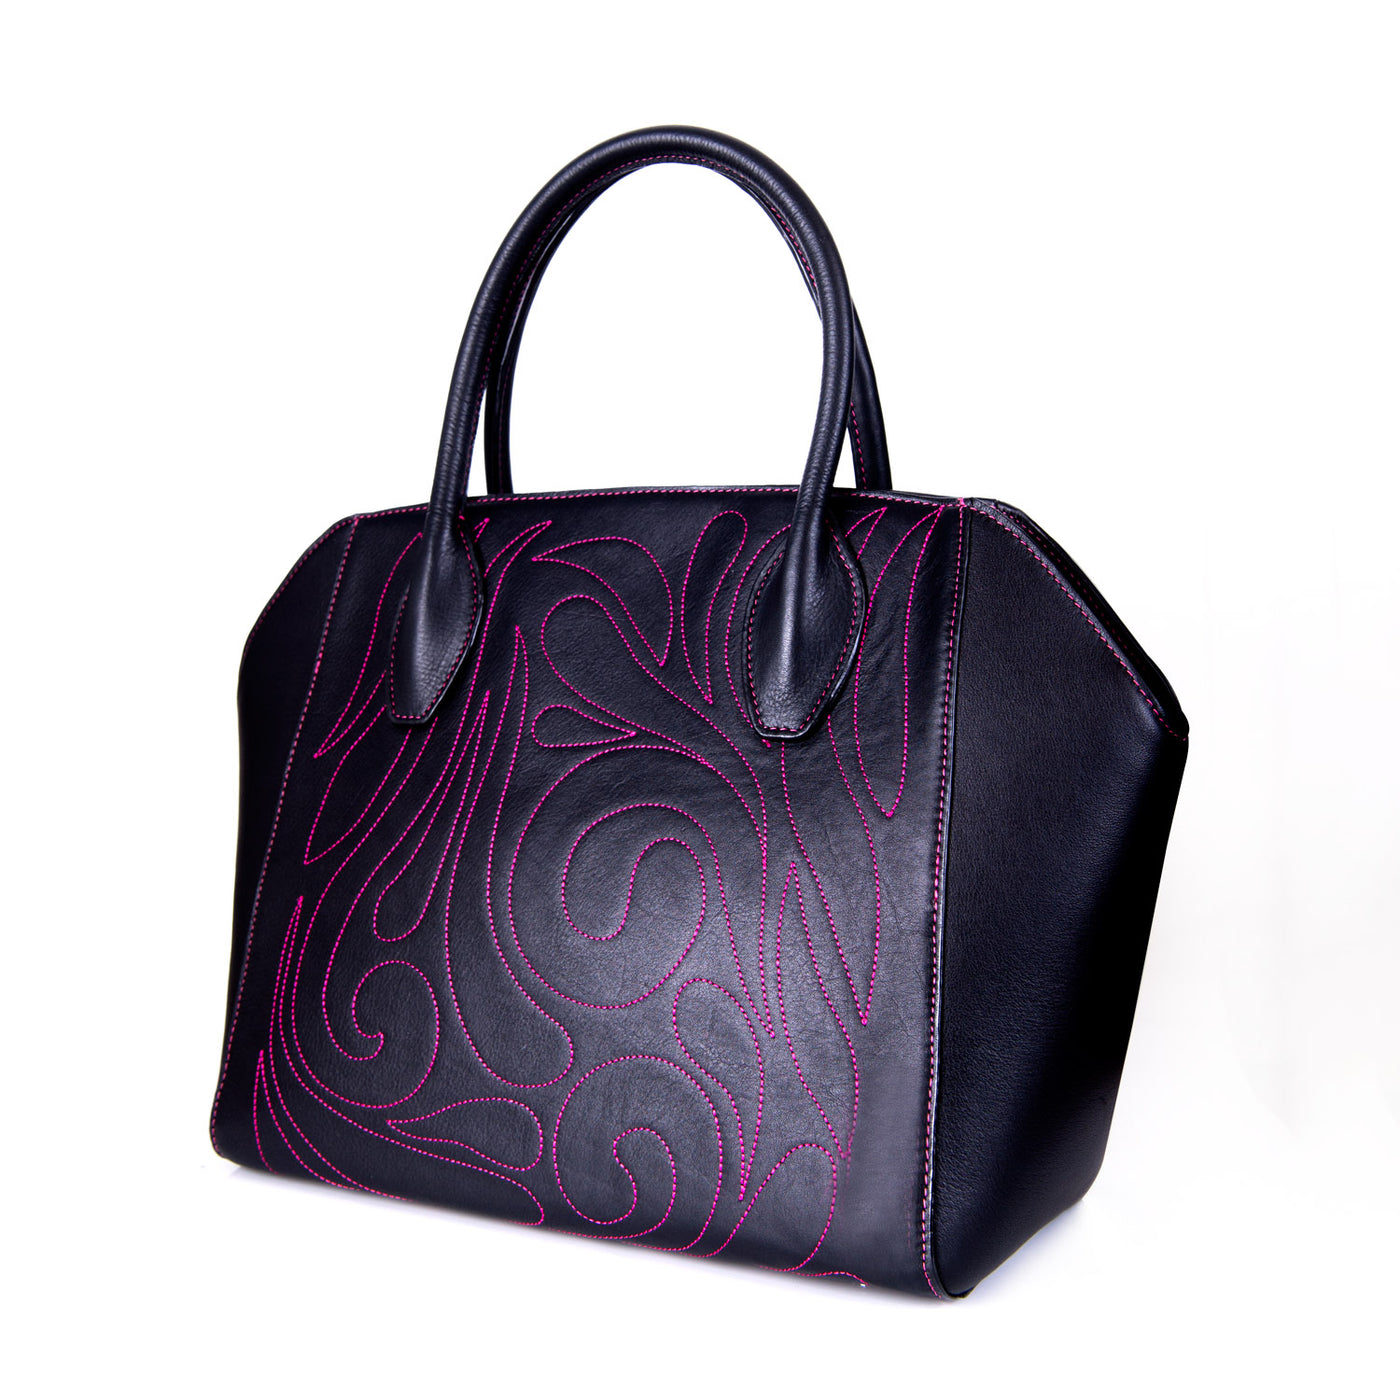 Lily Tourmaline Tote - Women's tote bag for everyday use